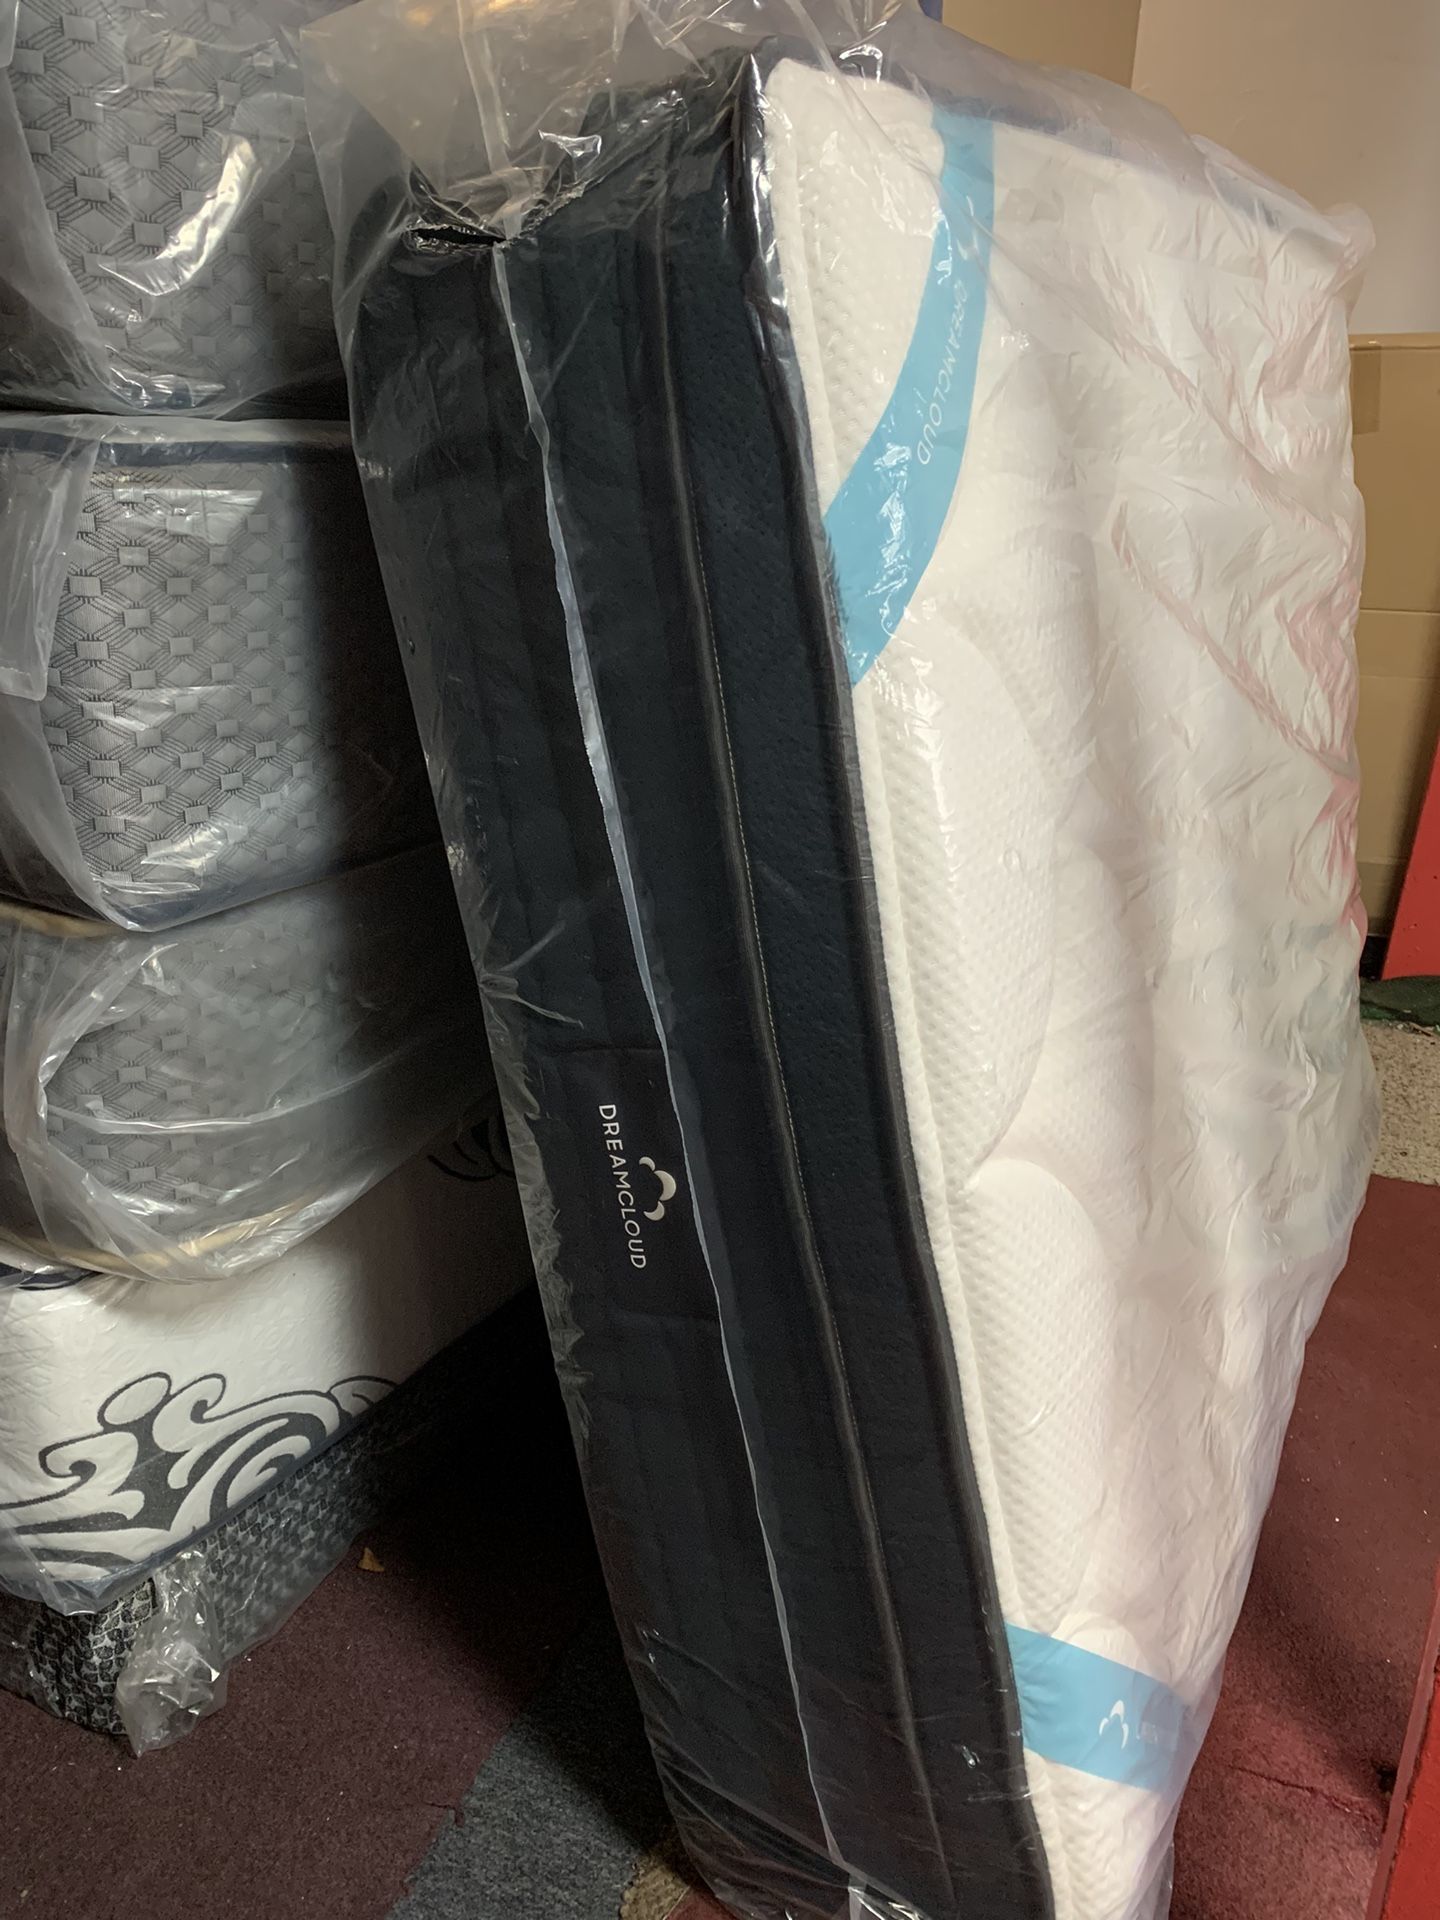 MATTRESS. SALE. BRAND NEW. 🆕. TWIN SIZE $119. FULL SIZE MATTRESS. $179. QUEEN SIZE. $199. KING SIZE. $329 LOCATION 303 POCASSET AVE PROVIDENCE RI 